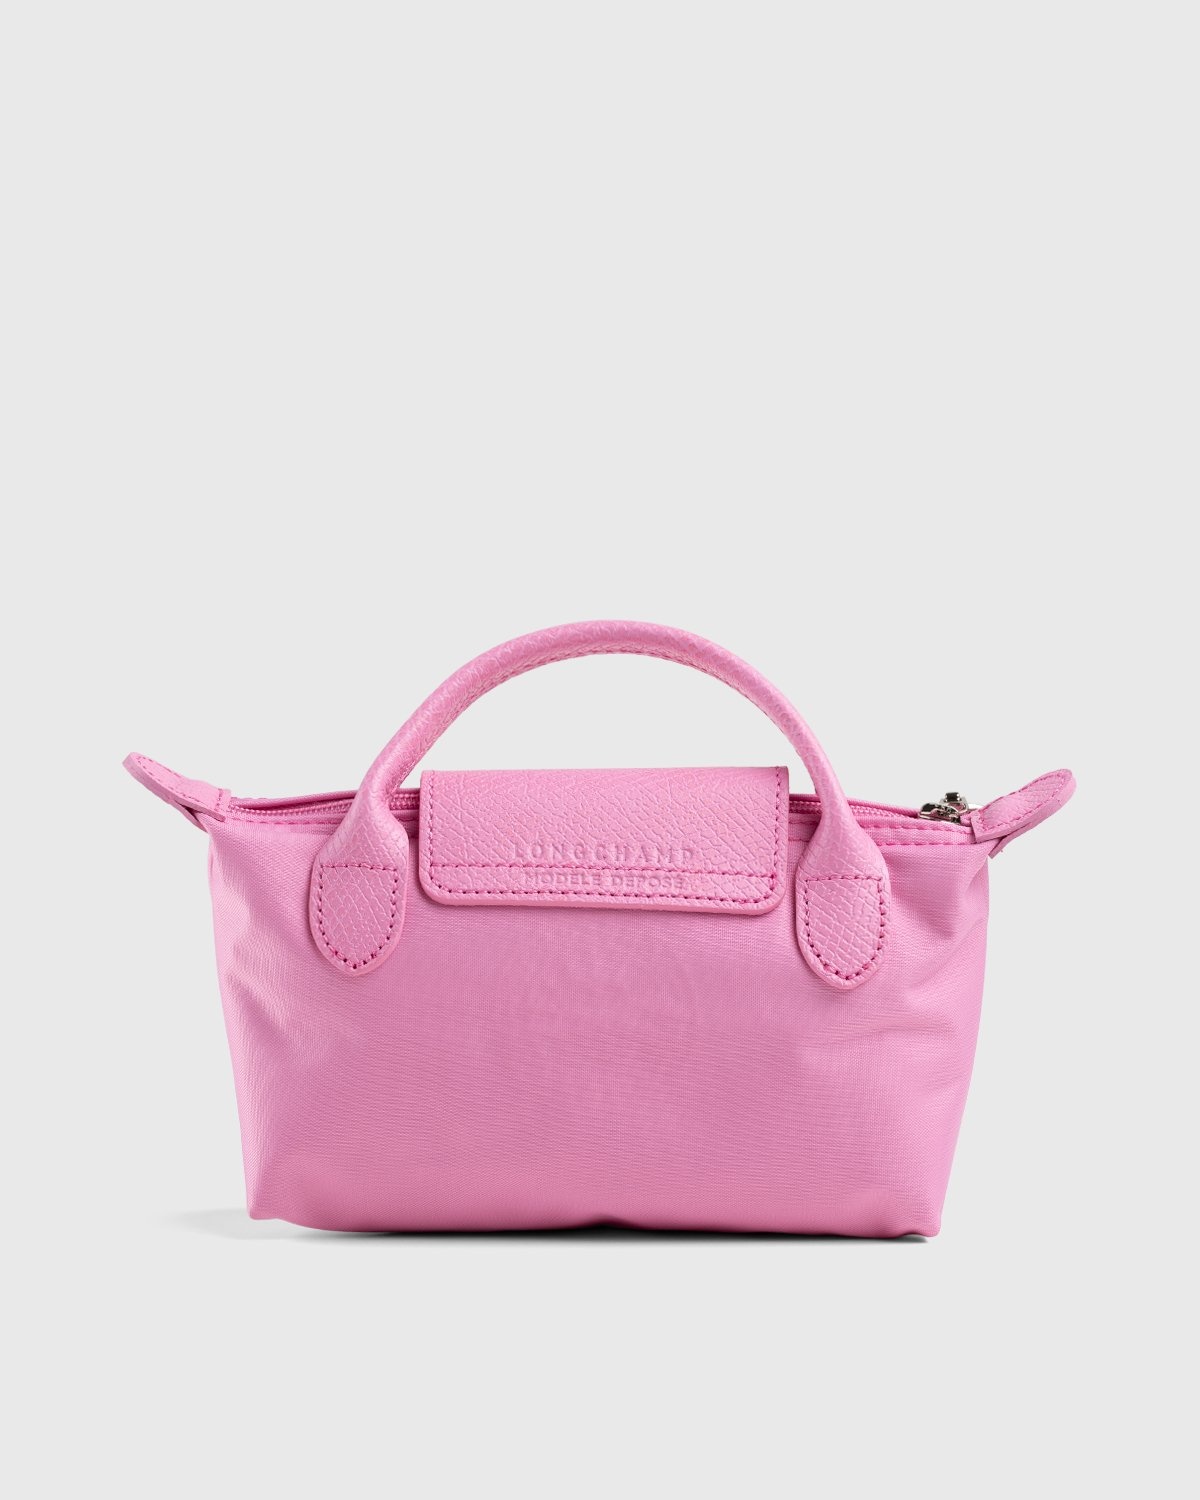 Longchamp Extra Small Le Pliage Leather Crossbody Bag in Pink